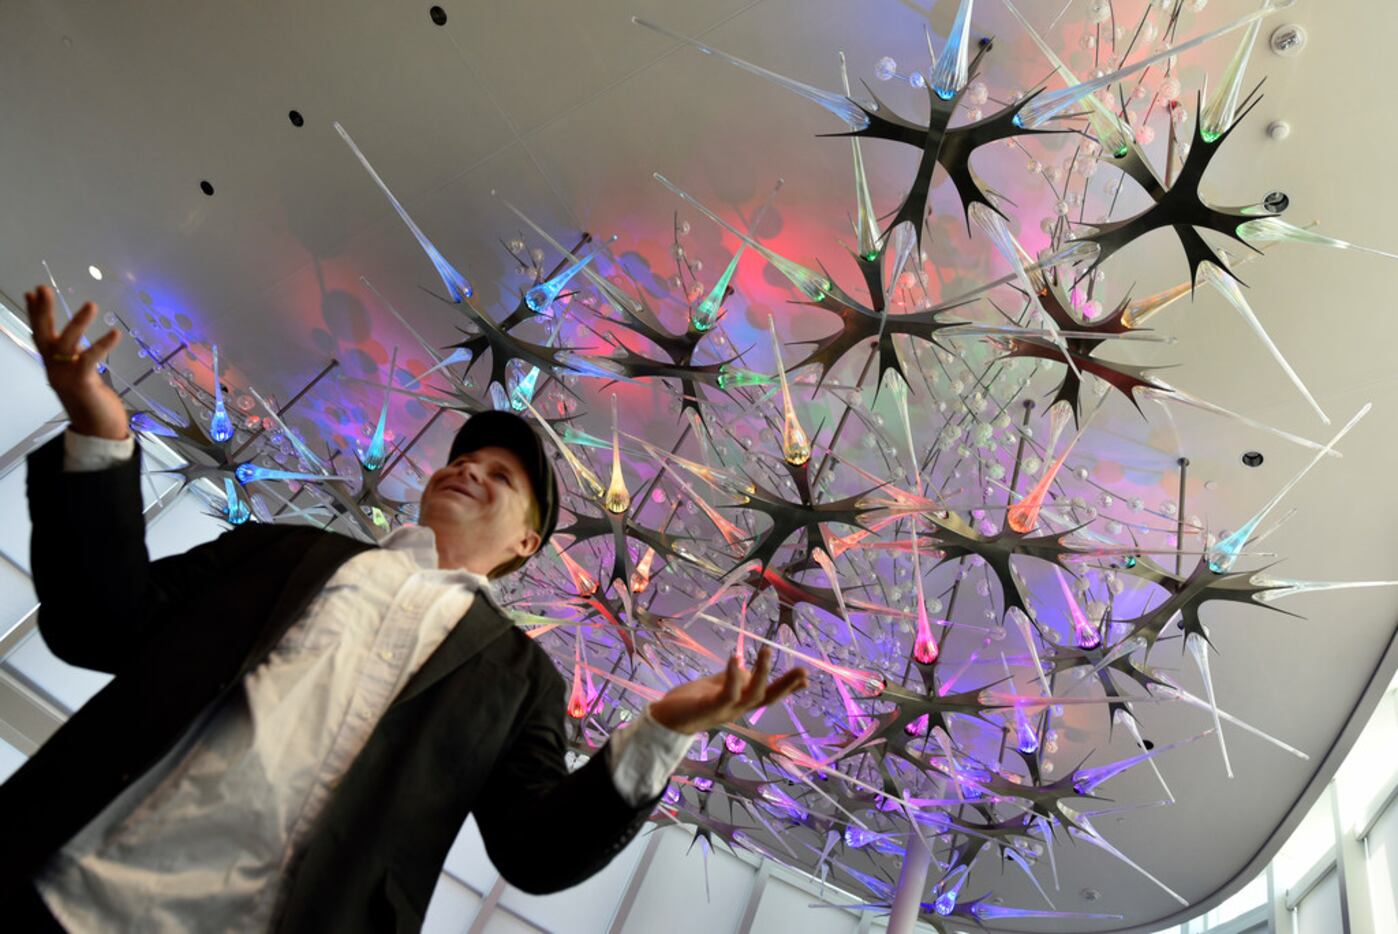 Glass artist David Gappa created this glass neuron installation titled "Introspection" to...